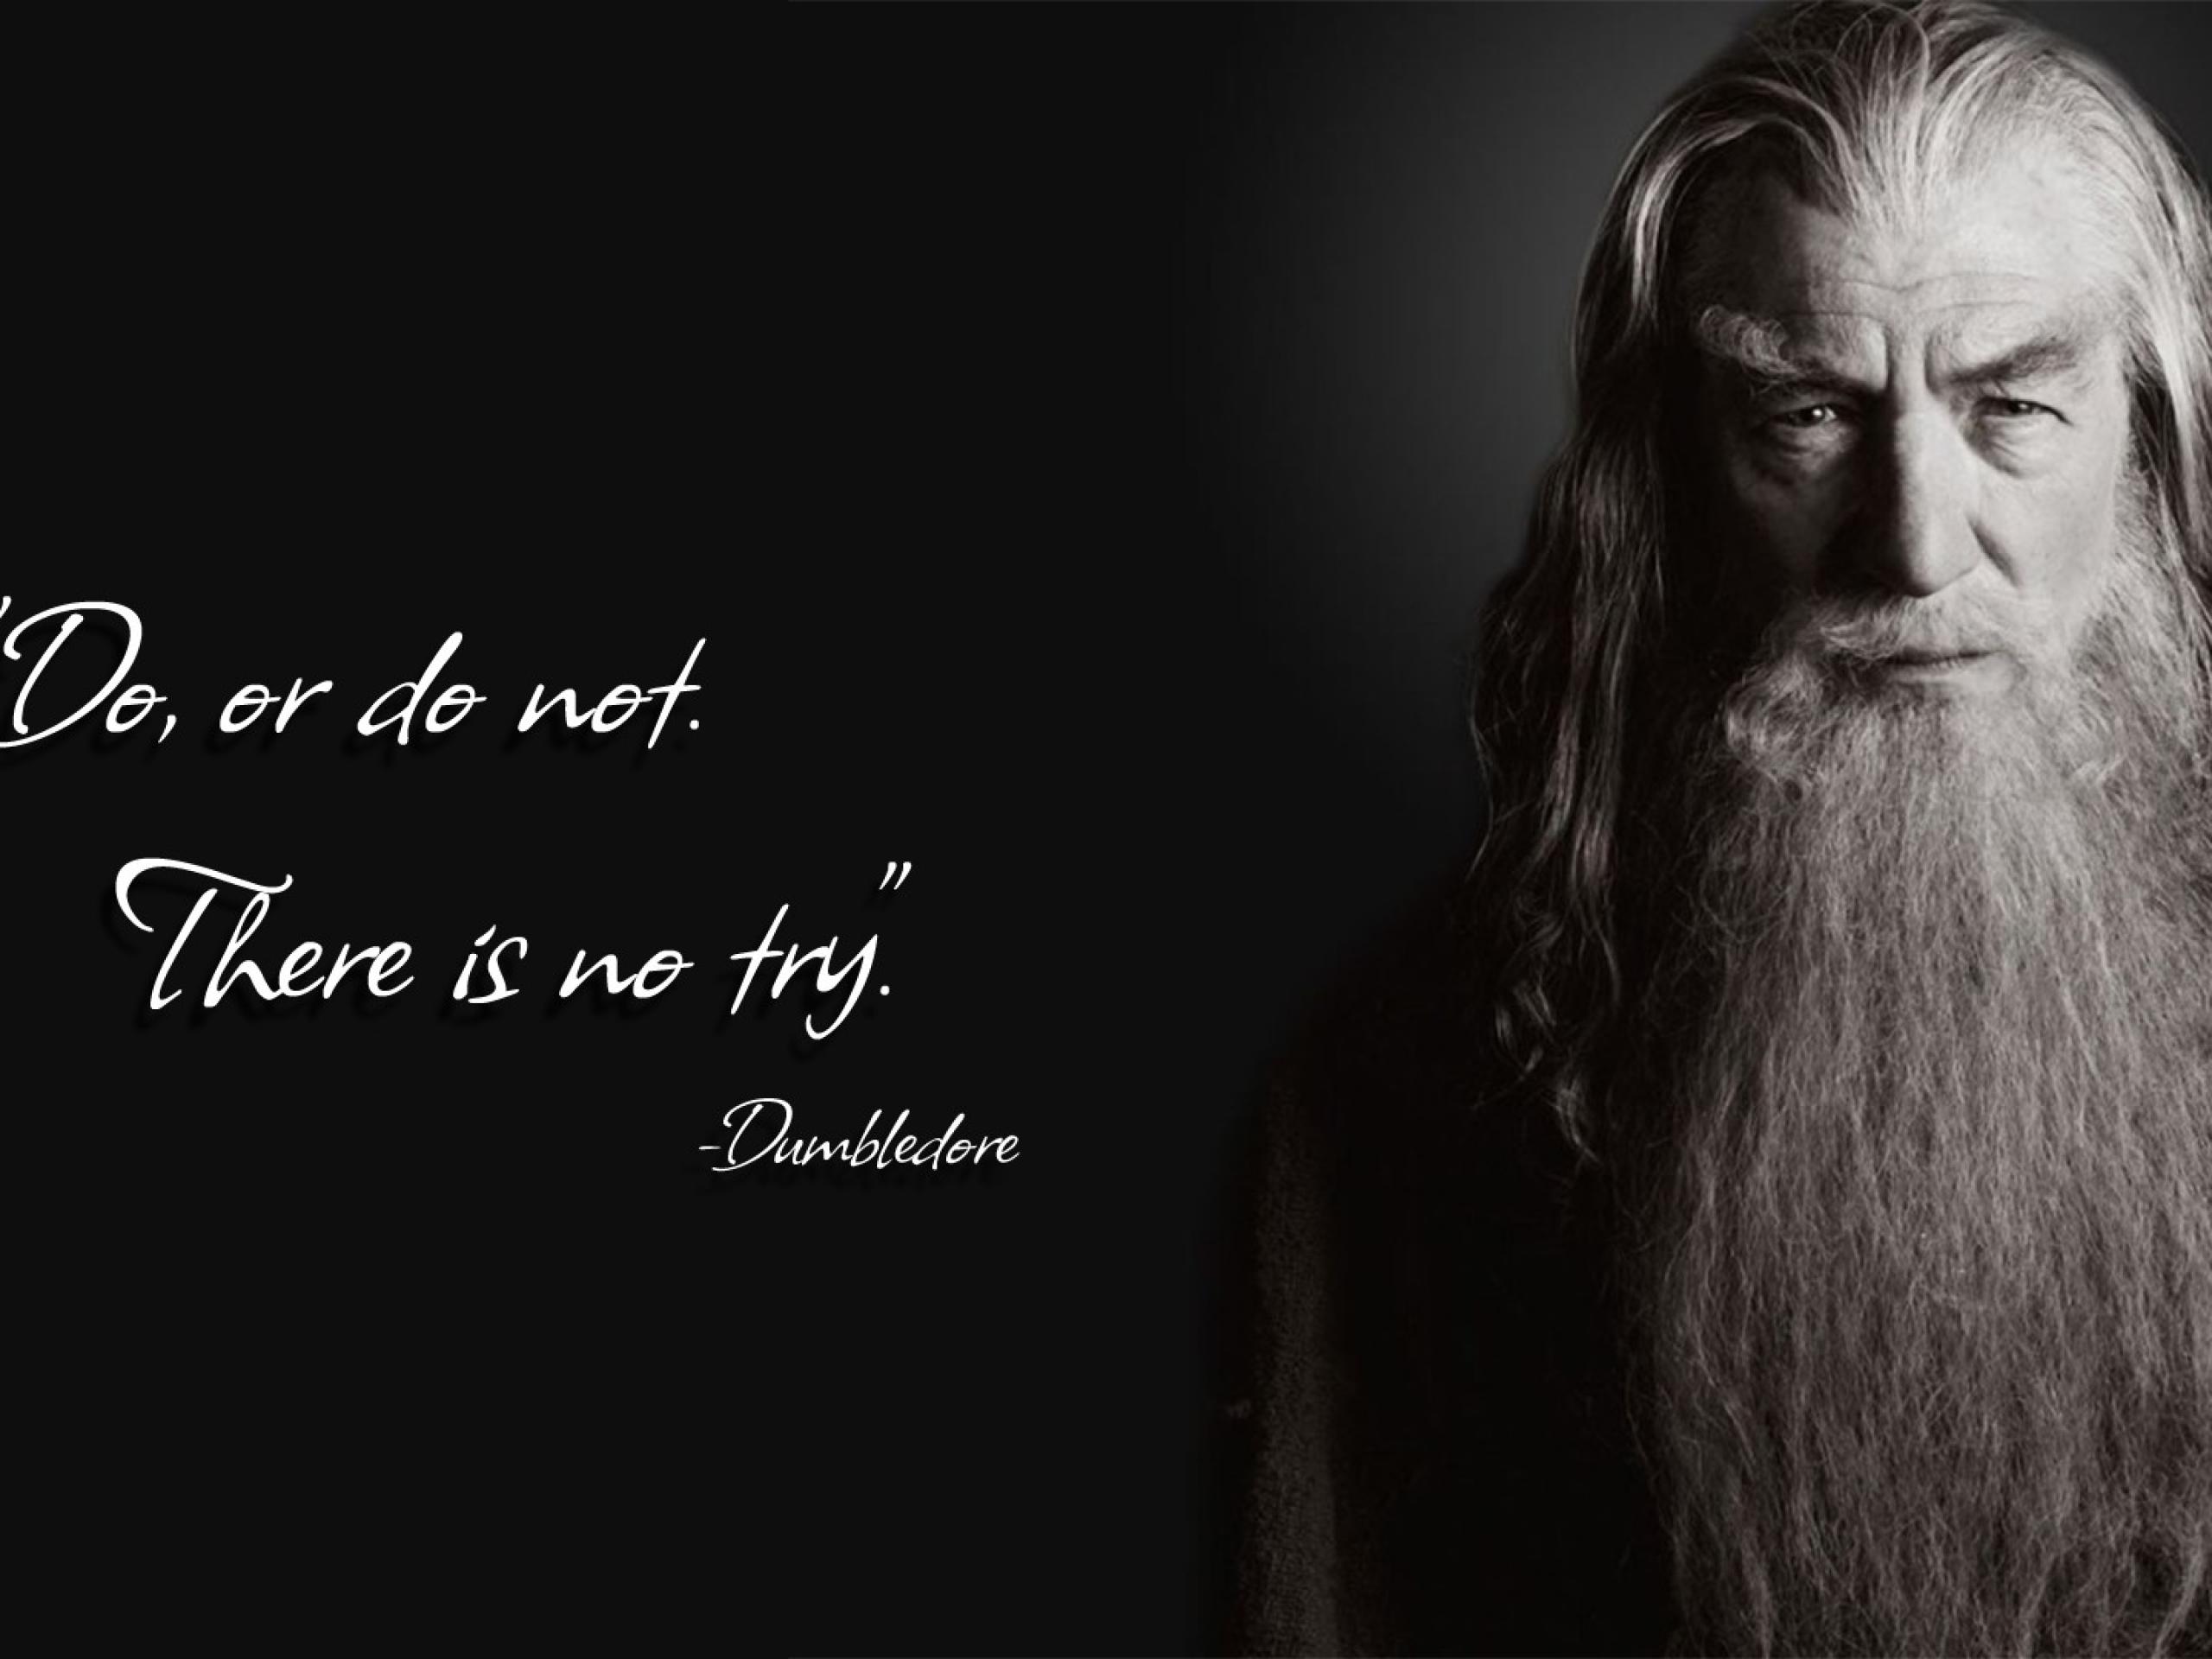 Harry Potter Quotes Wallpaper